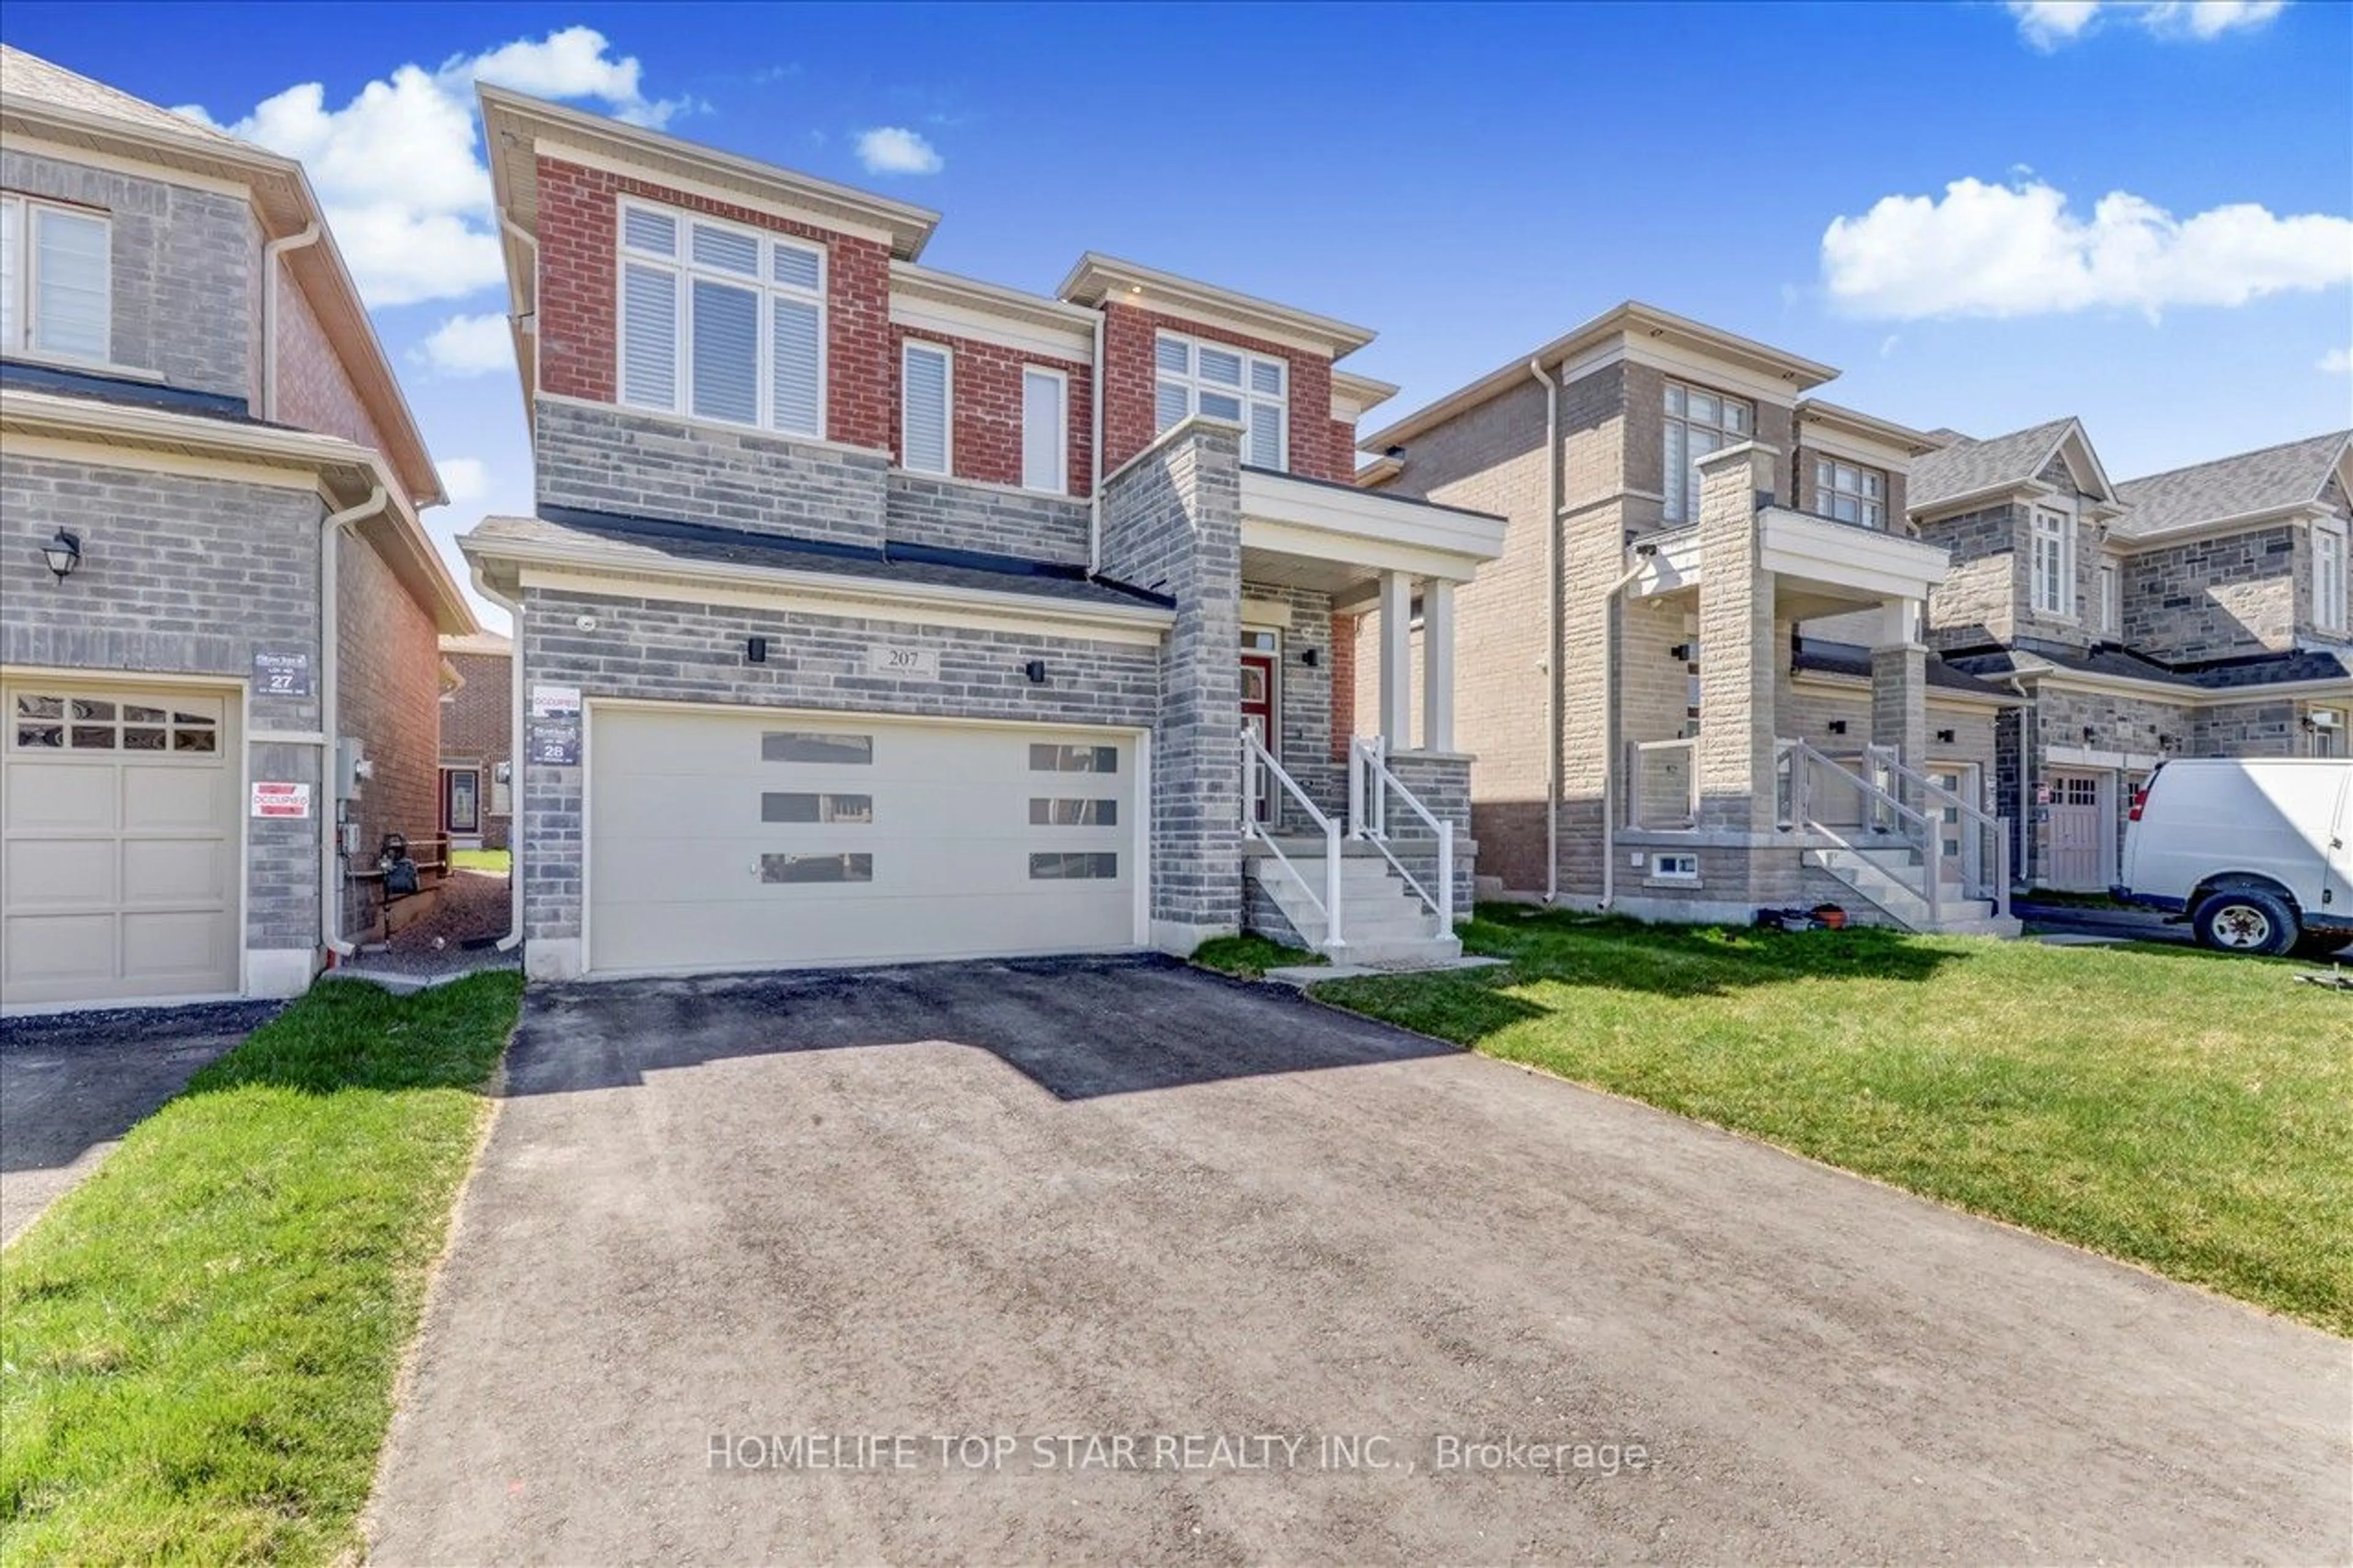 Frontside or backside of a home for 207 Wesmina Ave, Whitchurch-Stouffville Ontario L4A 5A2